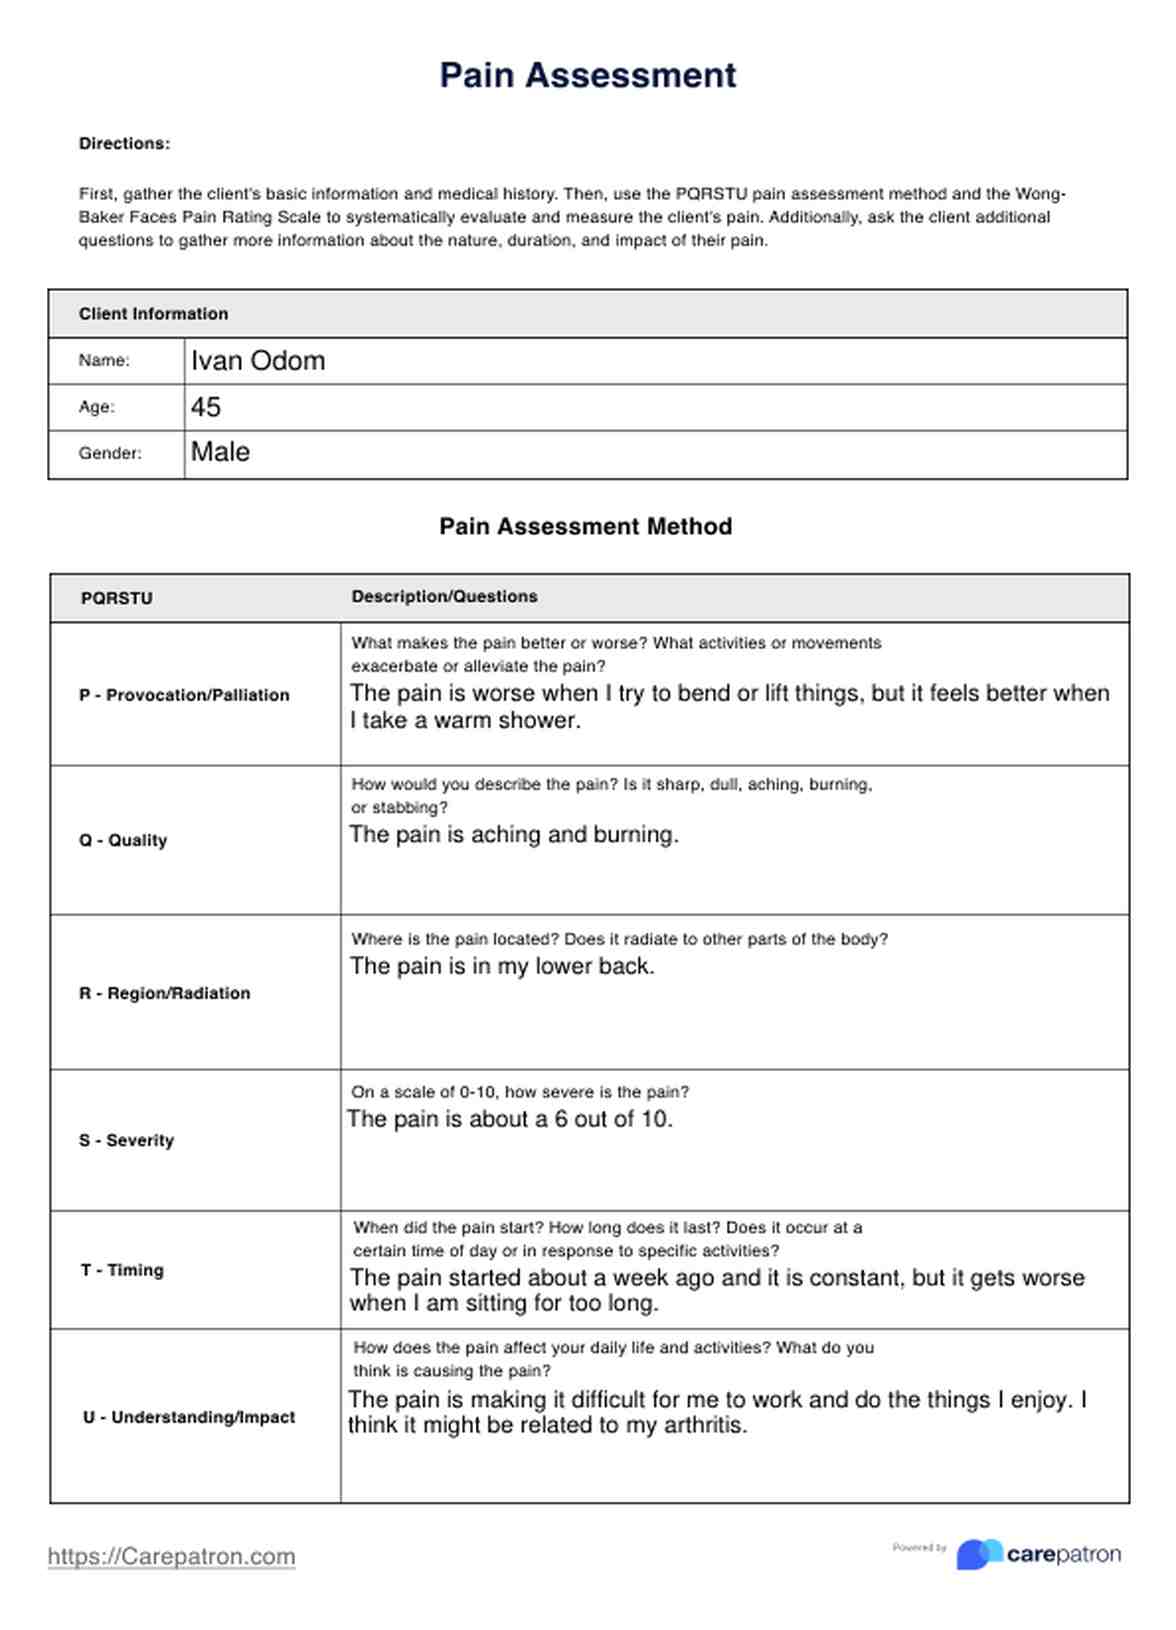 Pain Assessment PDF Example